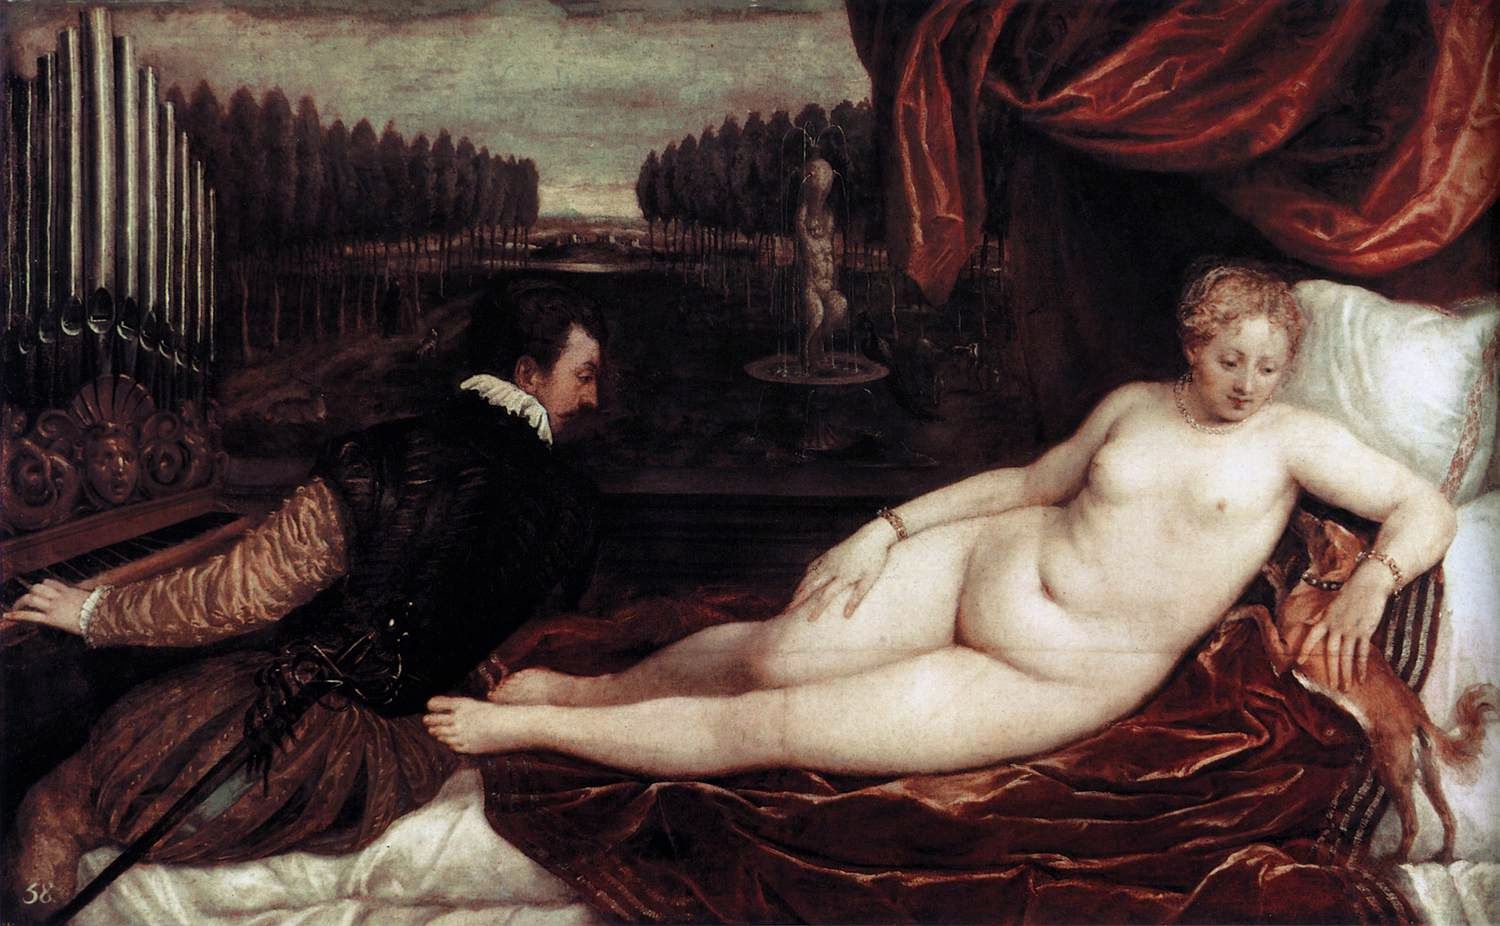 Venus With Organist And Cupid by Titian